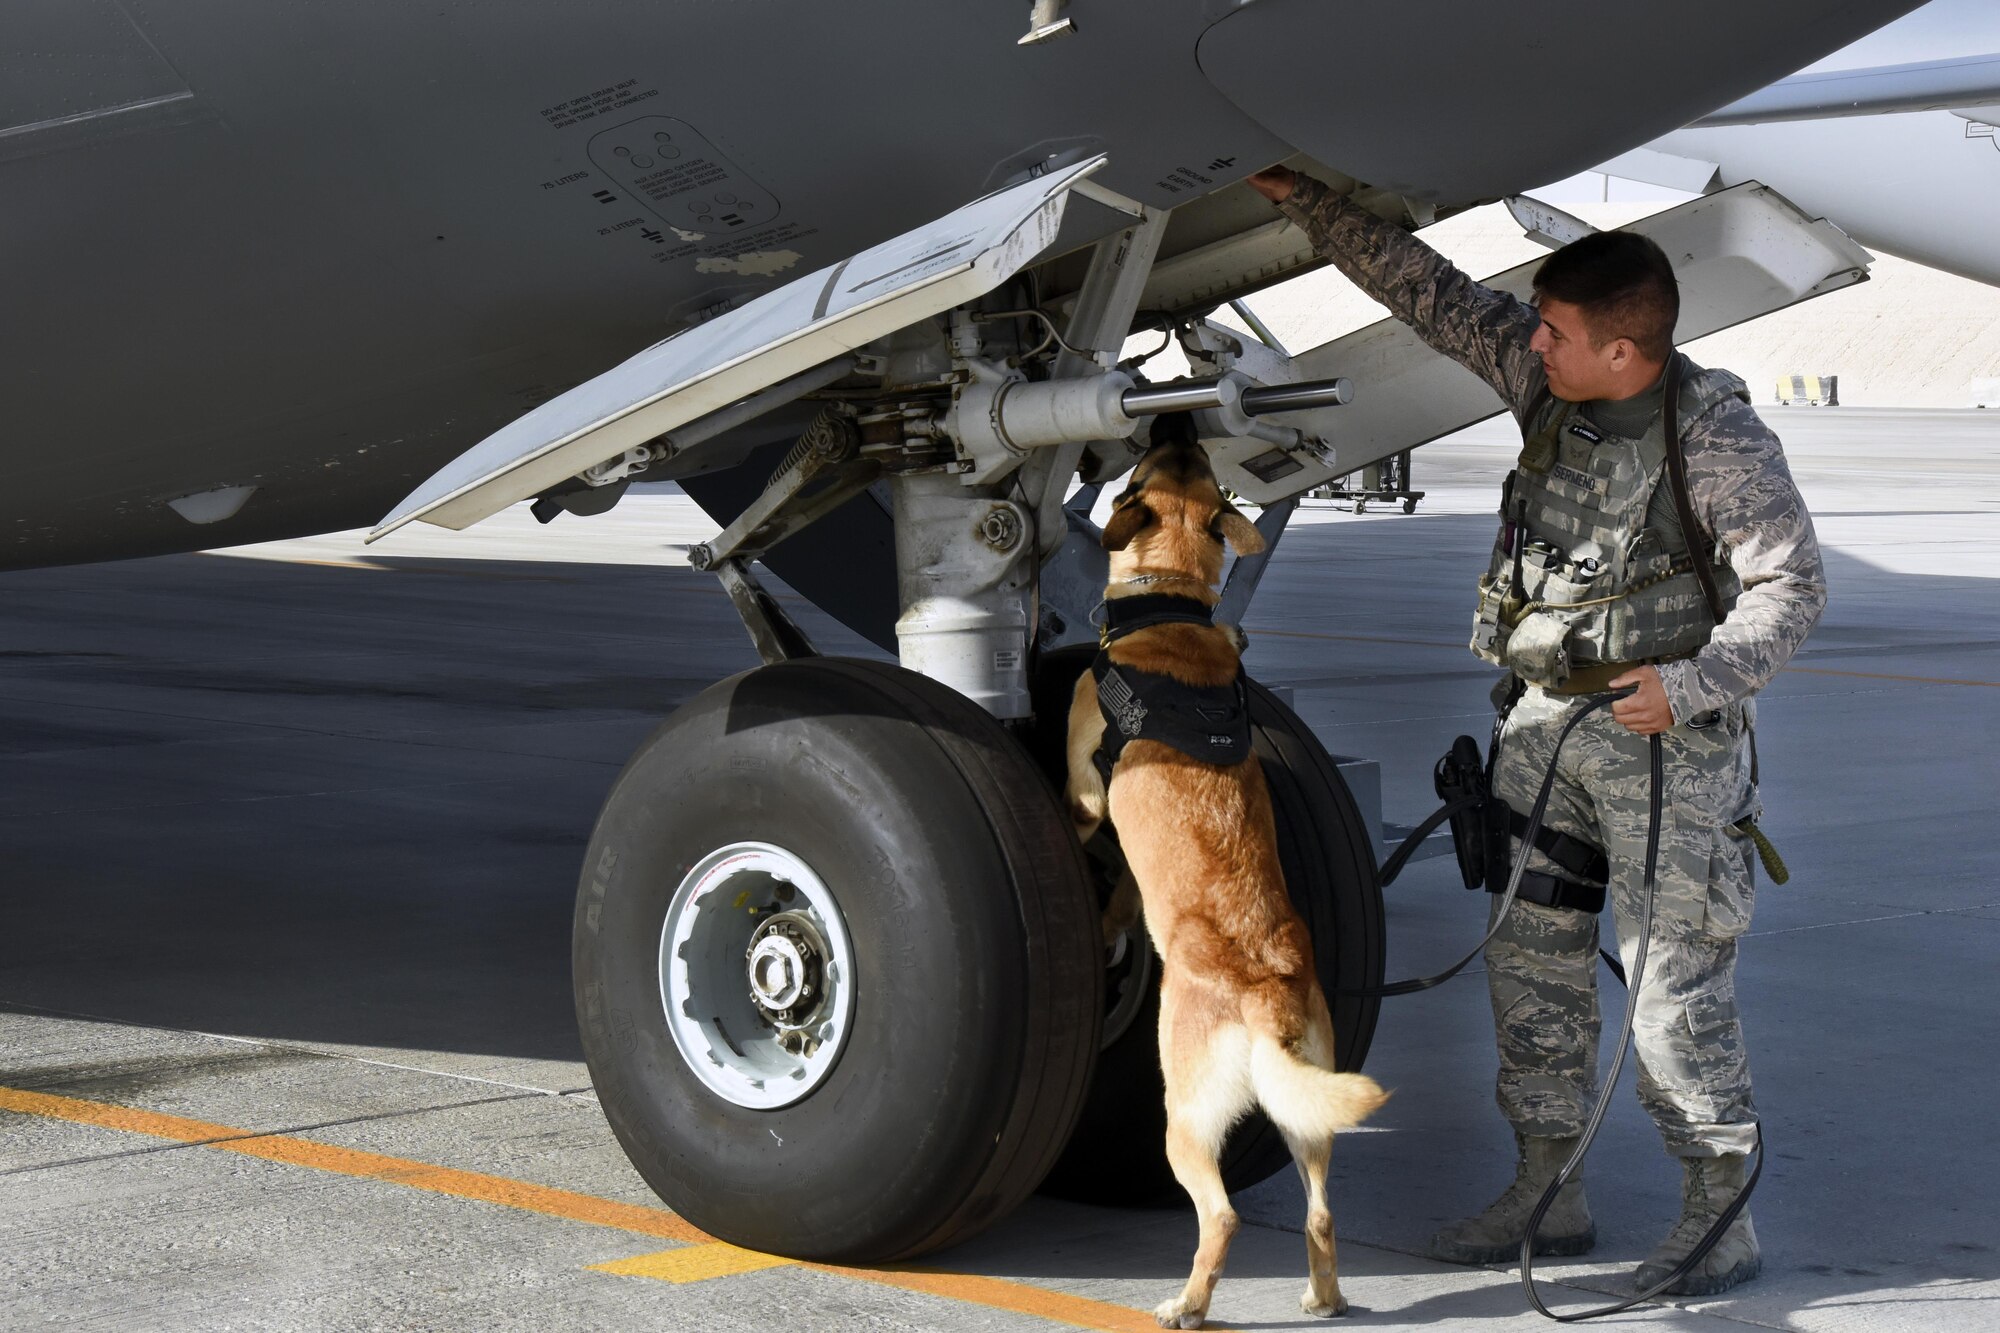 U.S. Air Force Senior Airman Kaleb Sermeno, a military working dog handler with the 379th Expeditionary Security Forces Squadron, sweeps the exterior of a C-17 Globemaster III with his military working dog Ben during detection training at Al Udeid Air Base, Qatar, April 15, 2017. Detection training in and around an aircraft is beneficial for the handler and the canine in the event that they need to respond to an aircraft related mission or incident. (U.S. Air Force photo by Senior Airman Cynthia A. Innocenti)